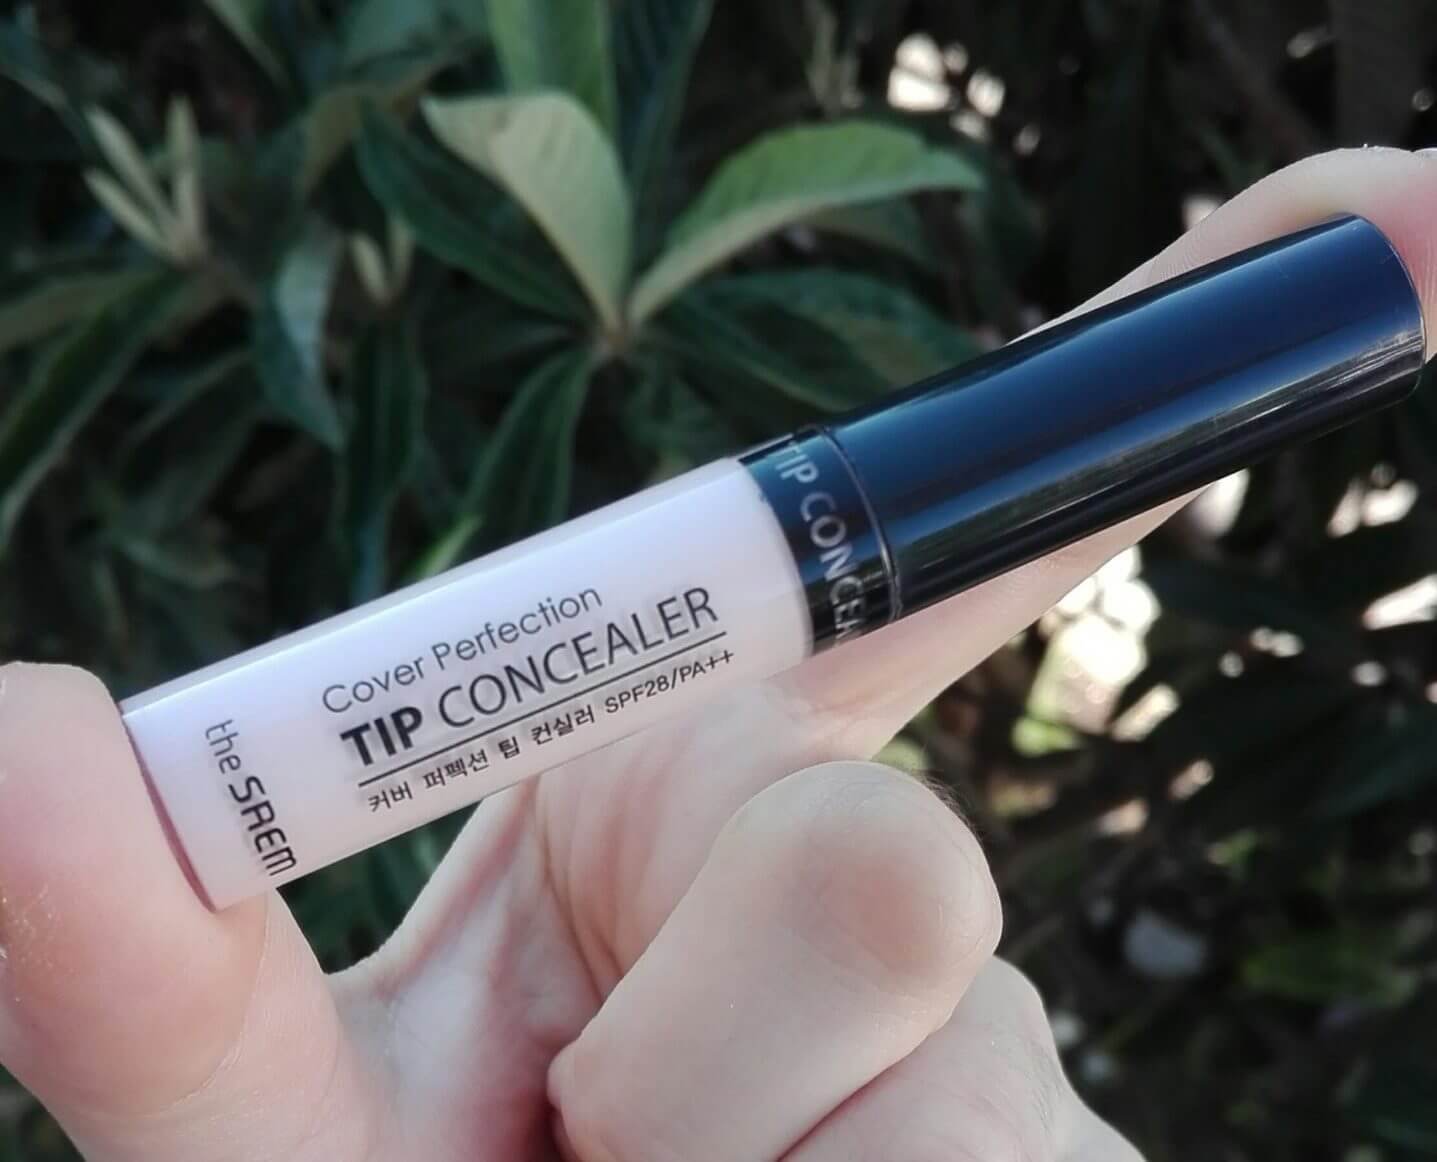  The Saem Cover Perfection Tip Concealer -bicicosmetics.vn